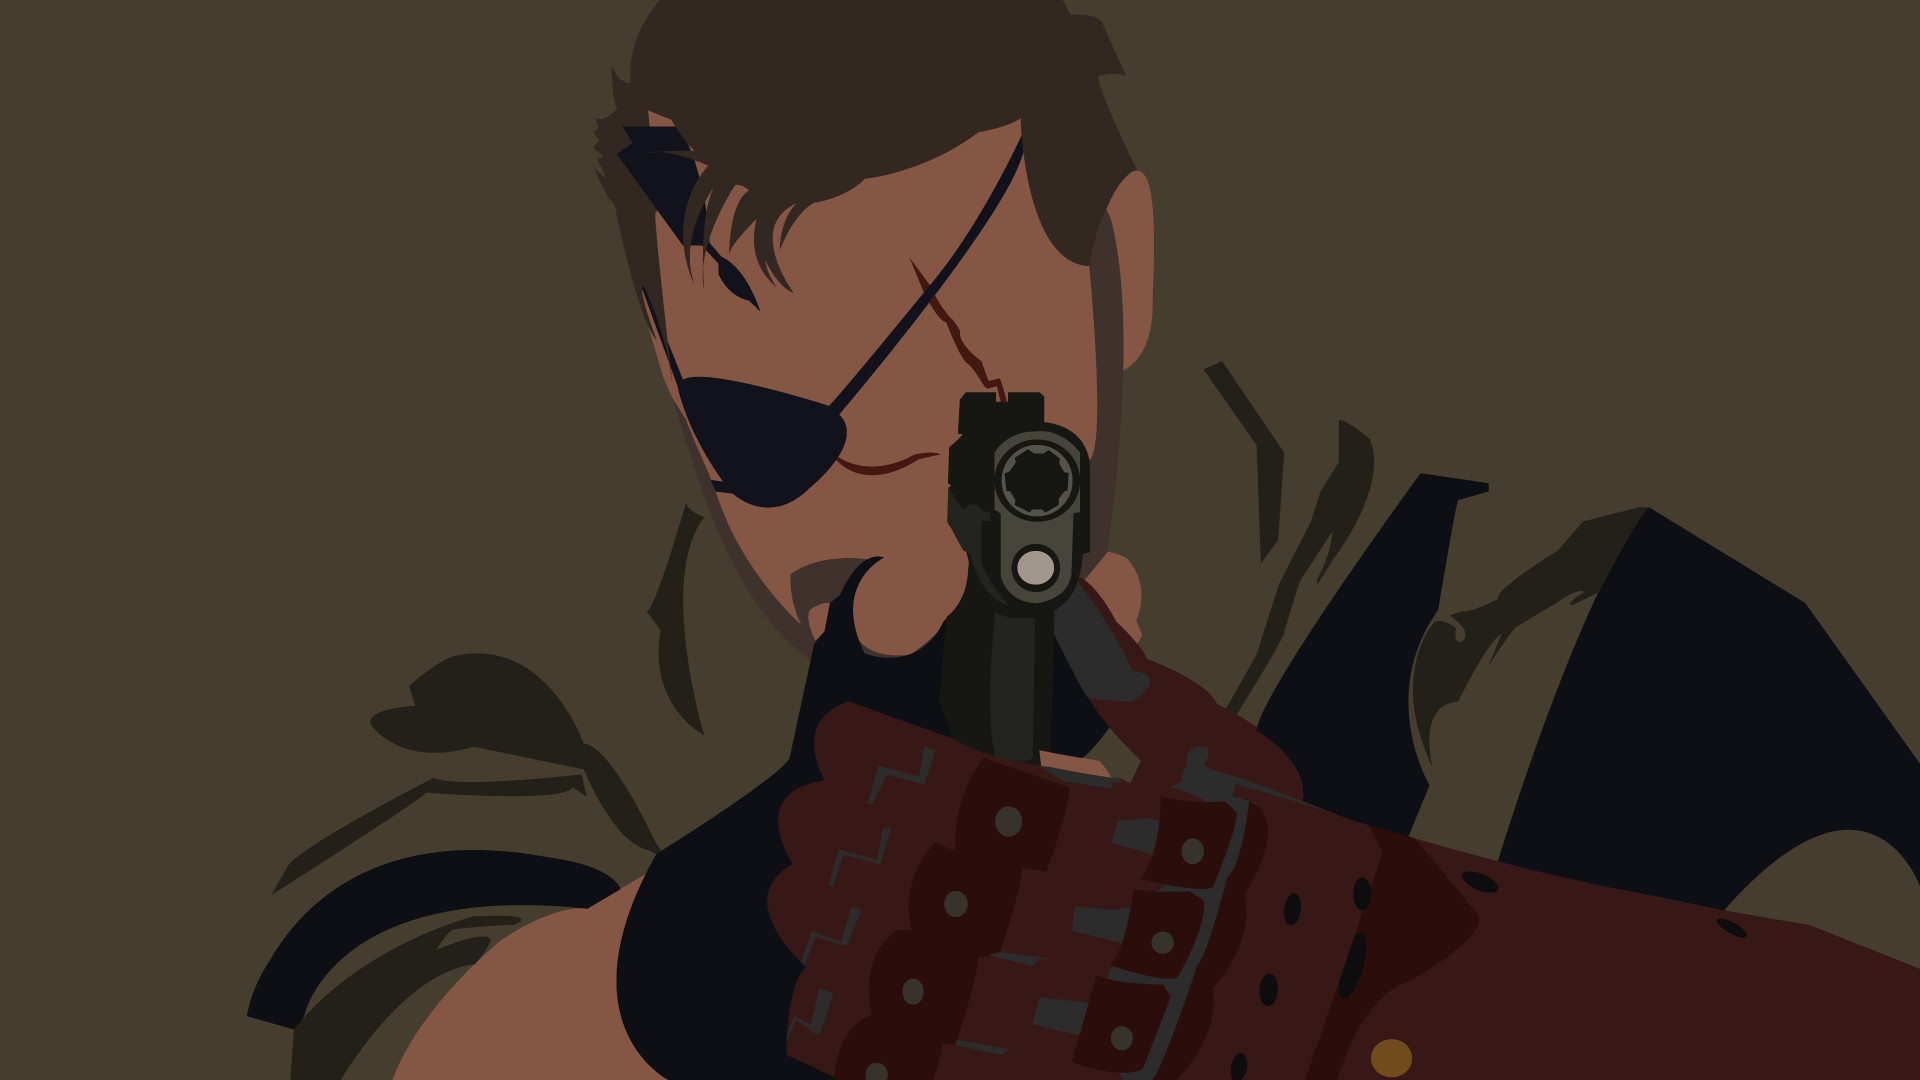 1920x1080 I create vector wallpapers for fun as a hobby. Latest one is Venom Snake!